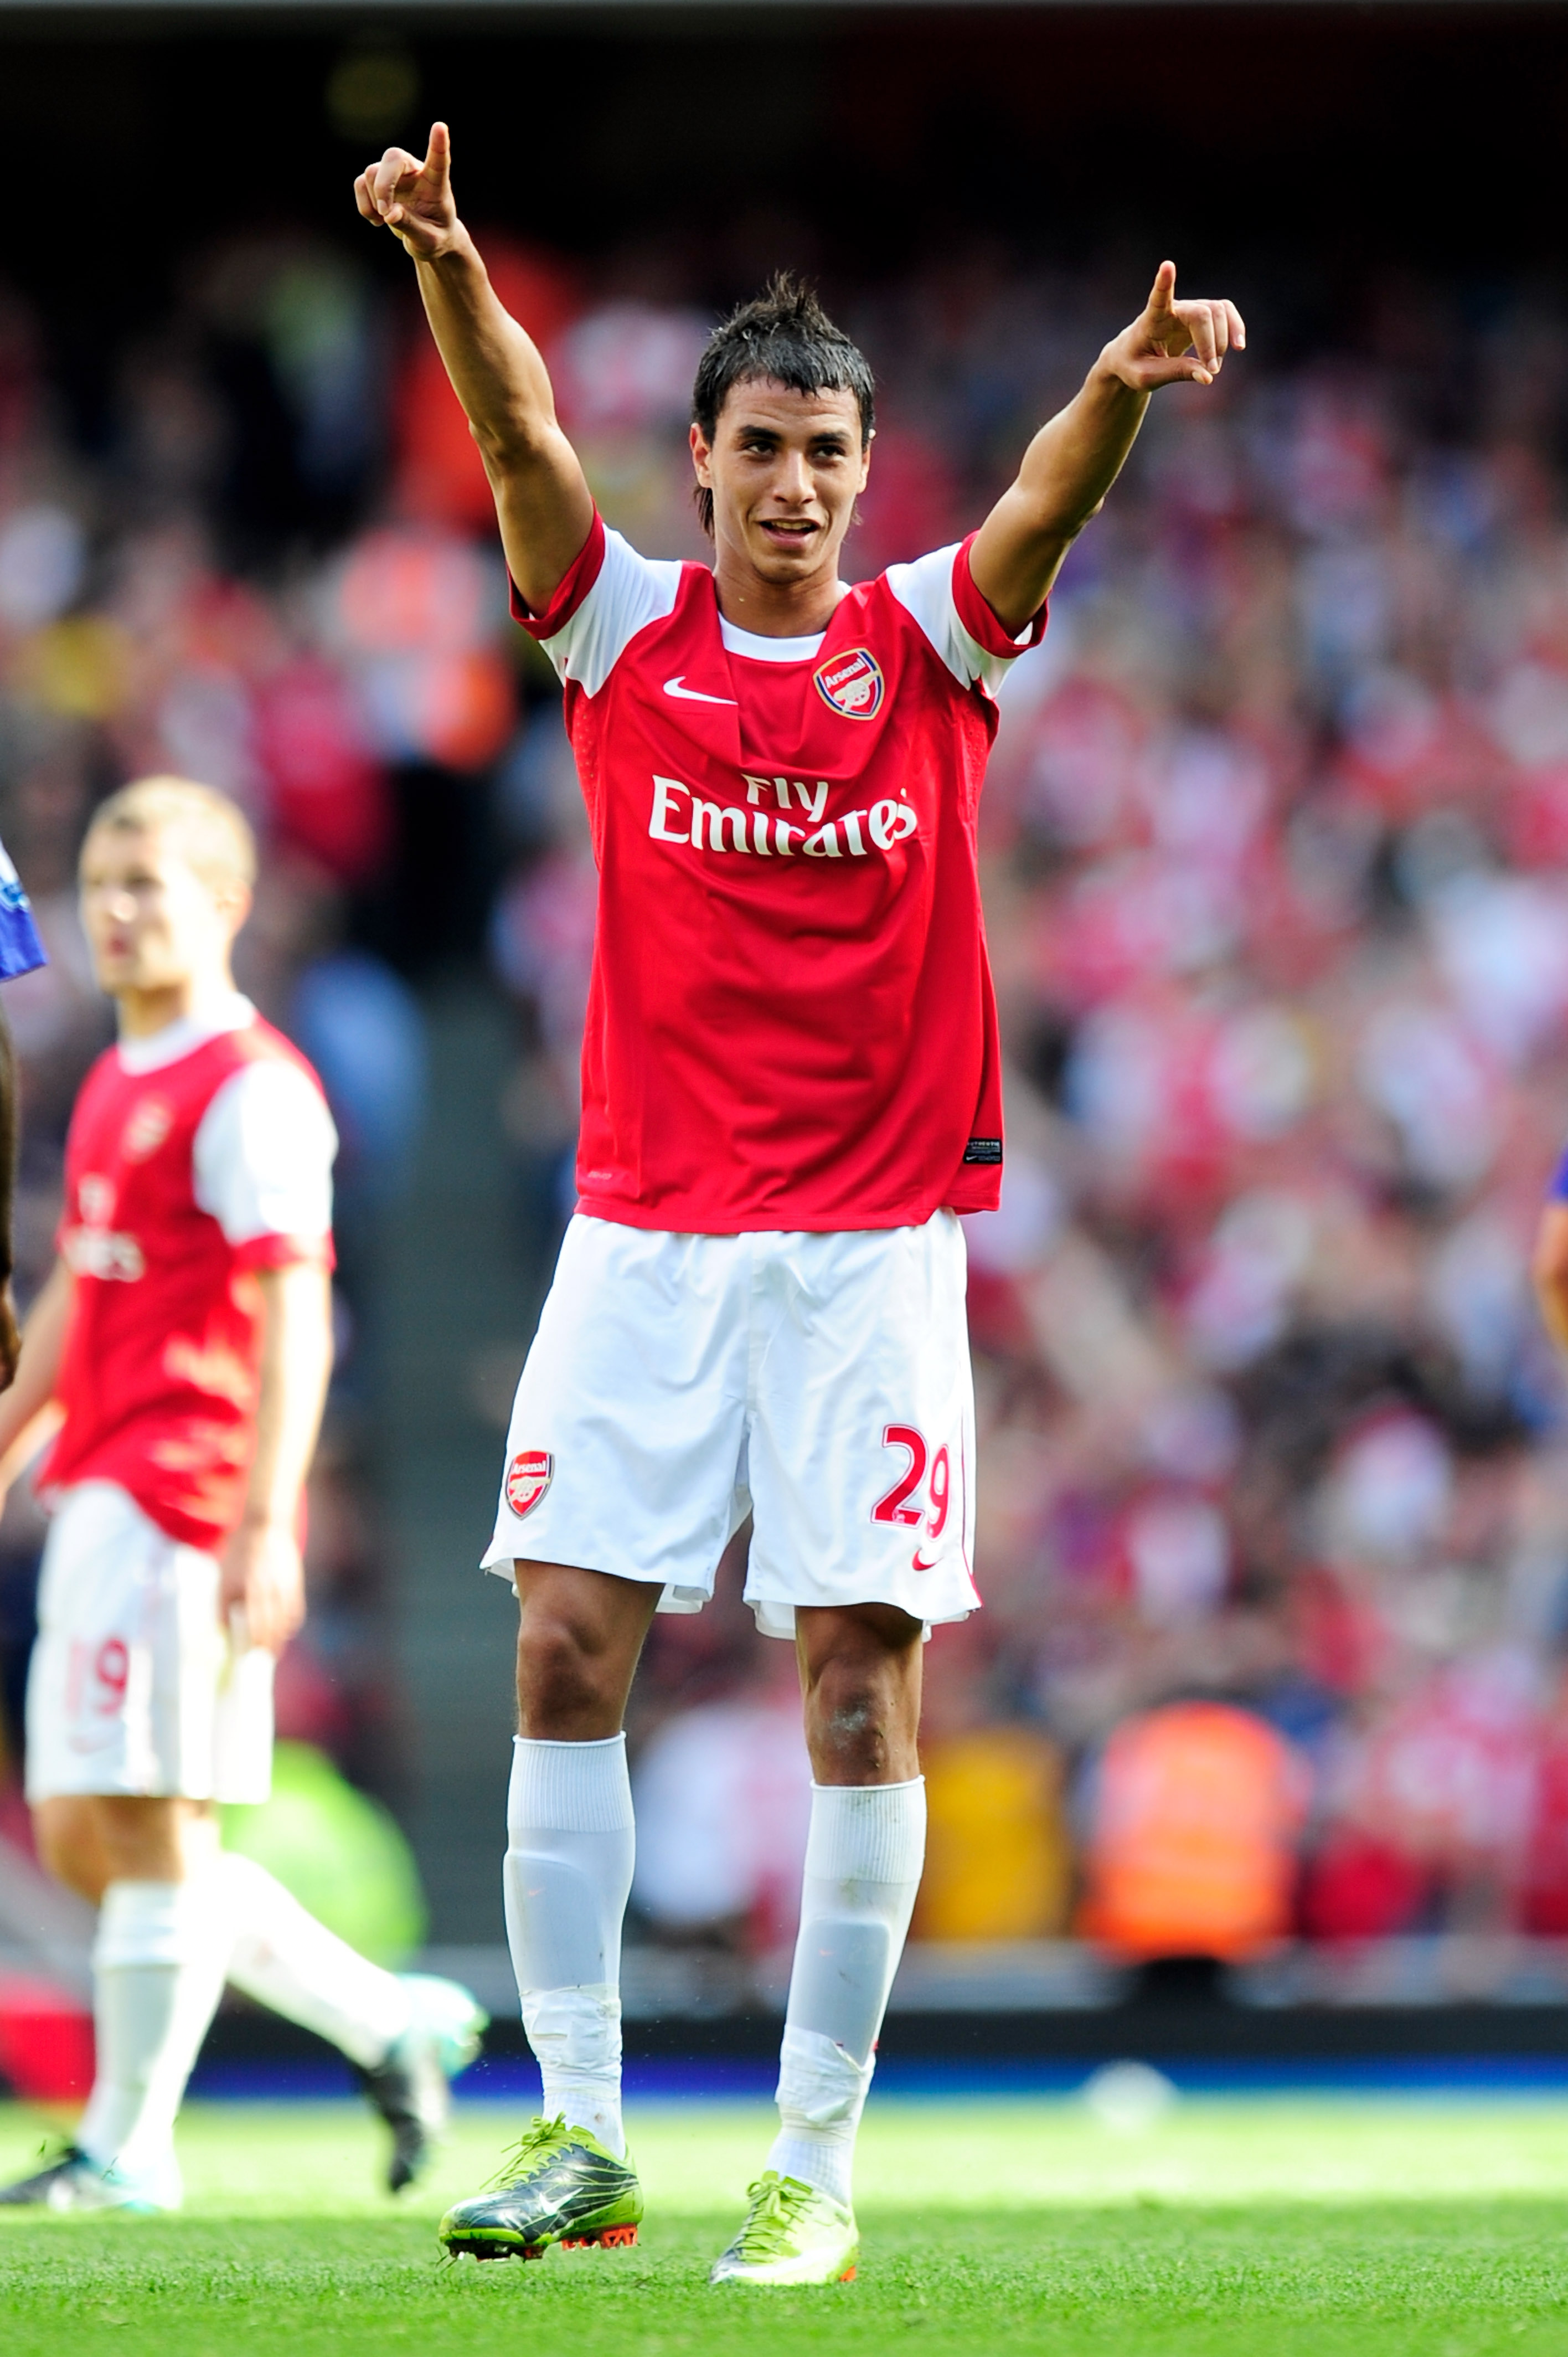 LONDON, ENGLAND - SEPTEMBER 11:  Marouane Chamakh of Arsenal celebrates after he scores his teams second goal during the Barclays Premier League match between Arsenal and Bolton Wanderers at The Emirates Stadium on September 11, 2010 in London, England.